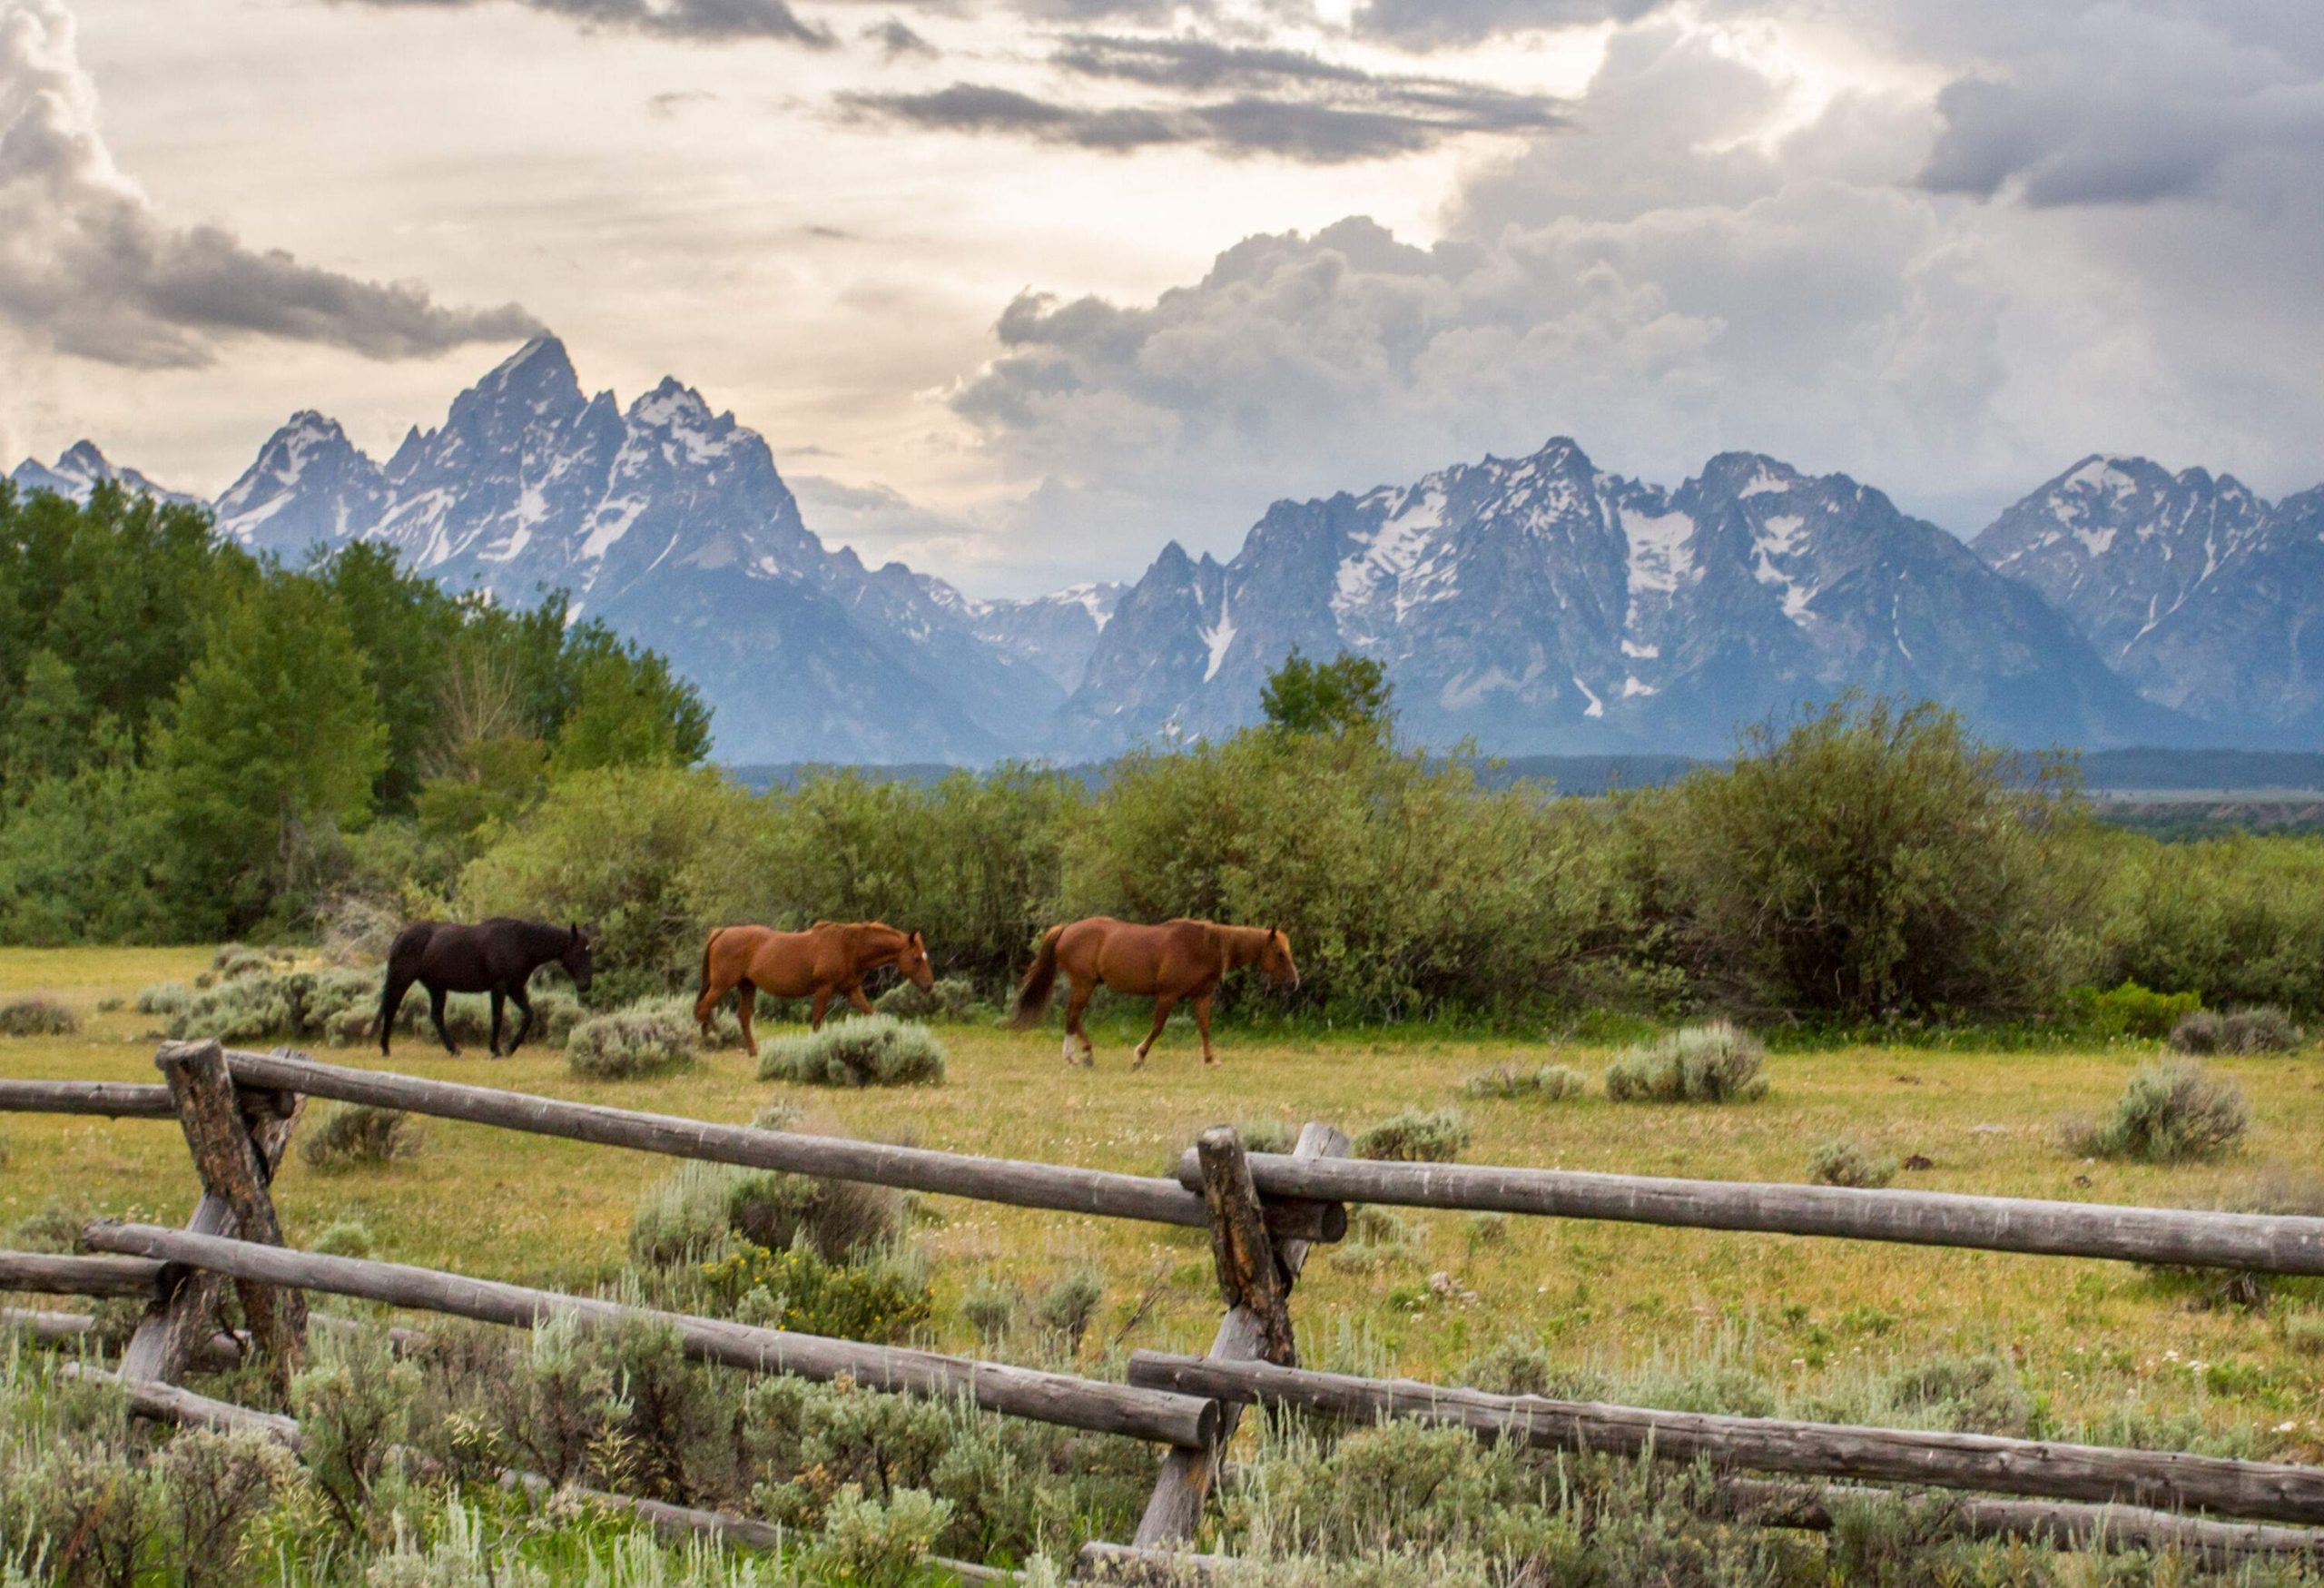 Three horses walk in the ranch, guarded by an old wood fence with a view of a stunning snow-capped mountain range in the background.